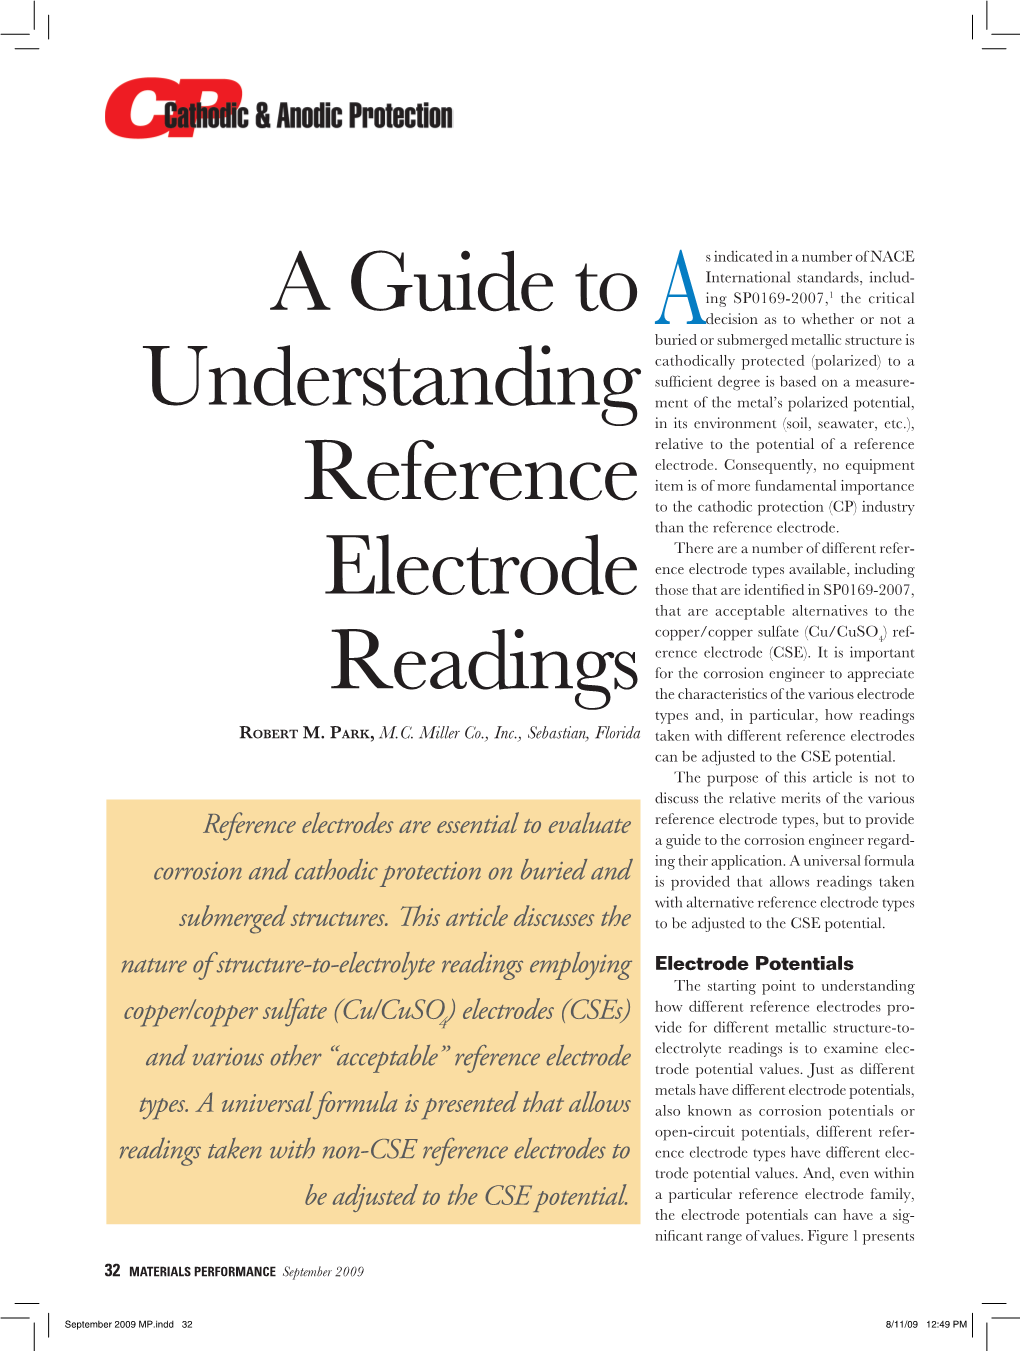 A Guide to Understanding Reference Electrode Readings